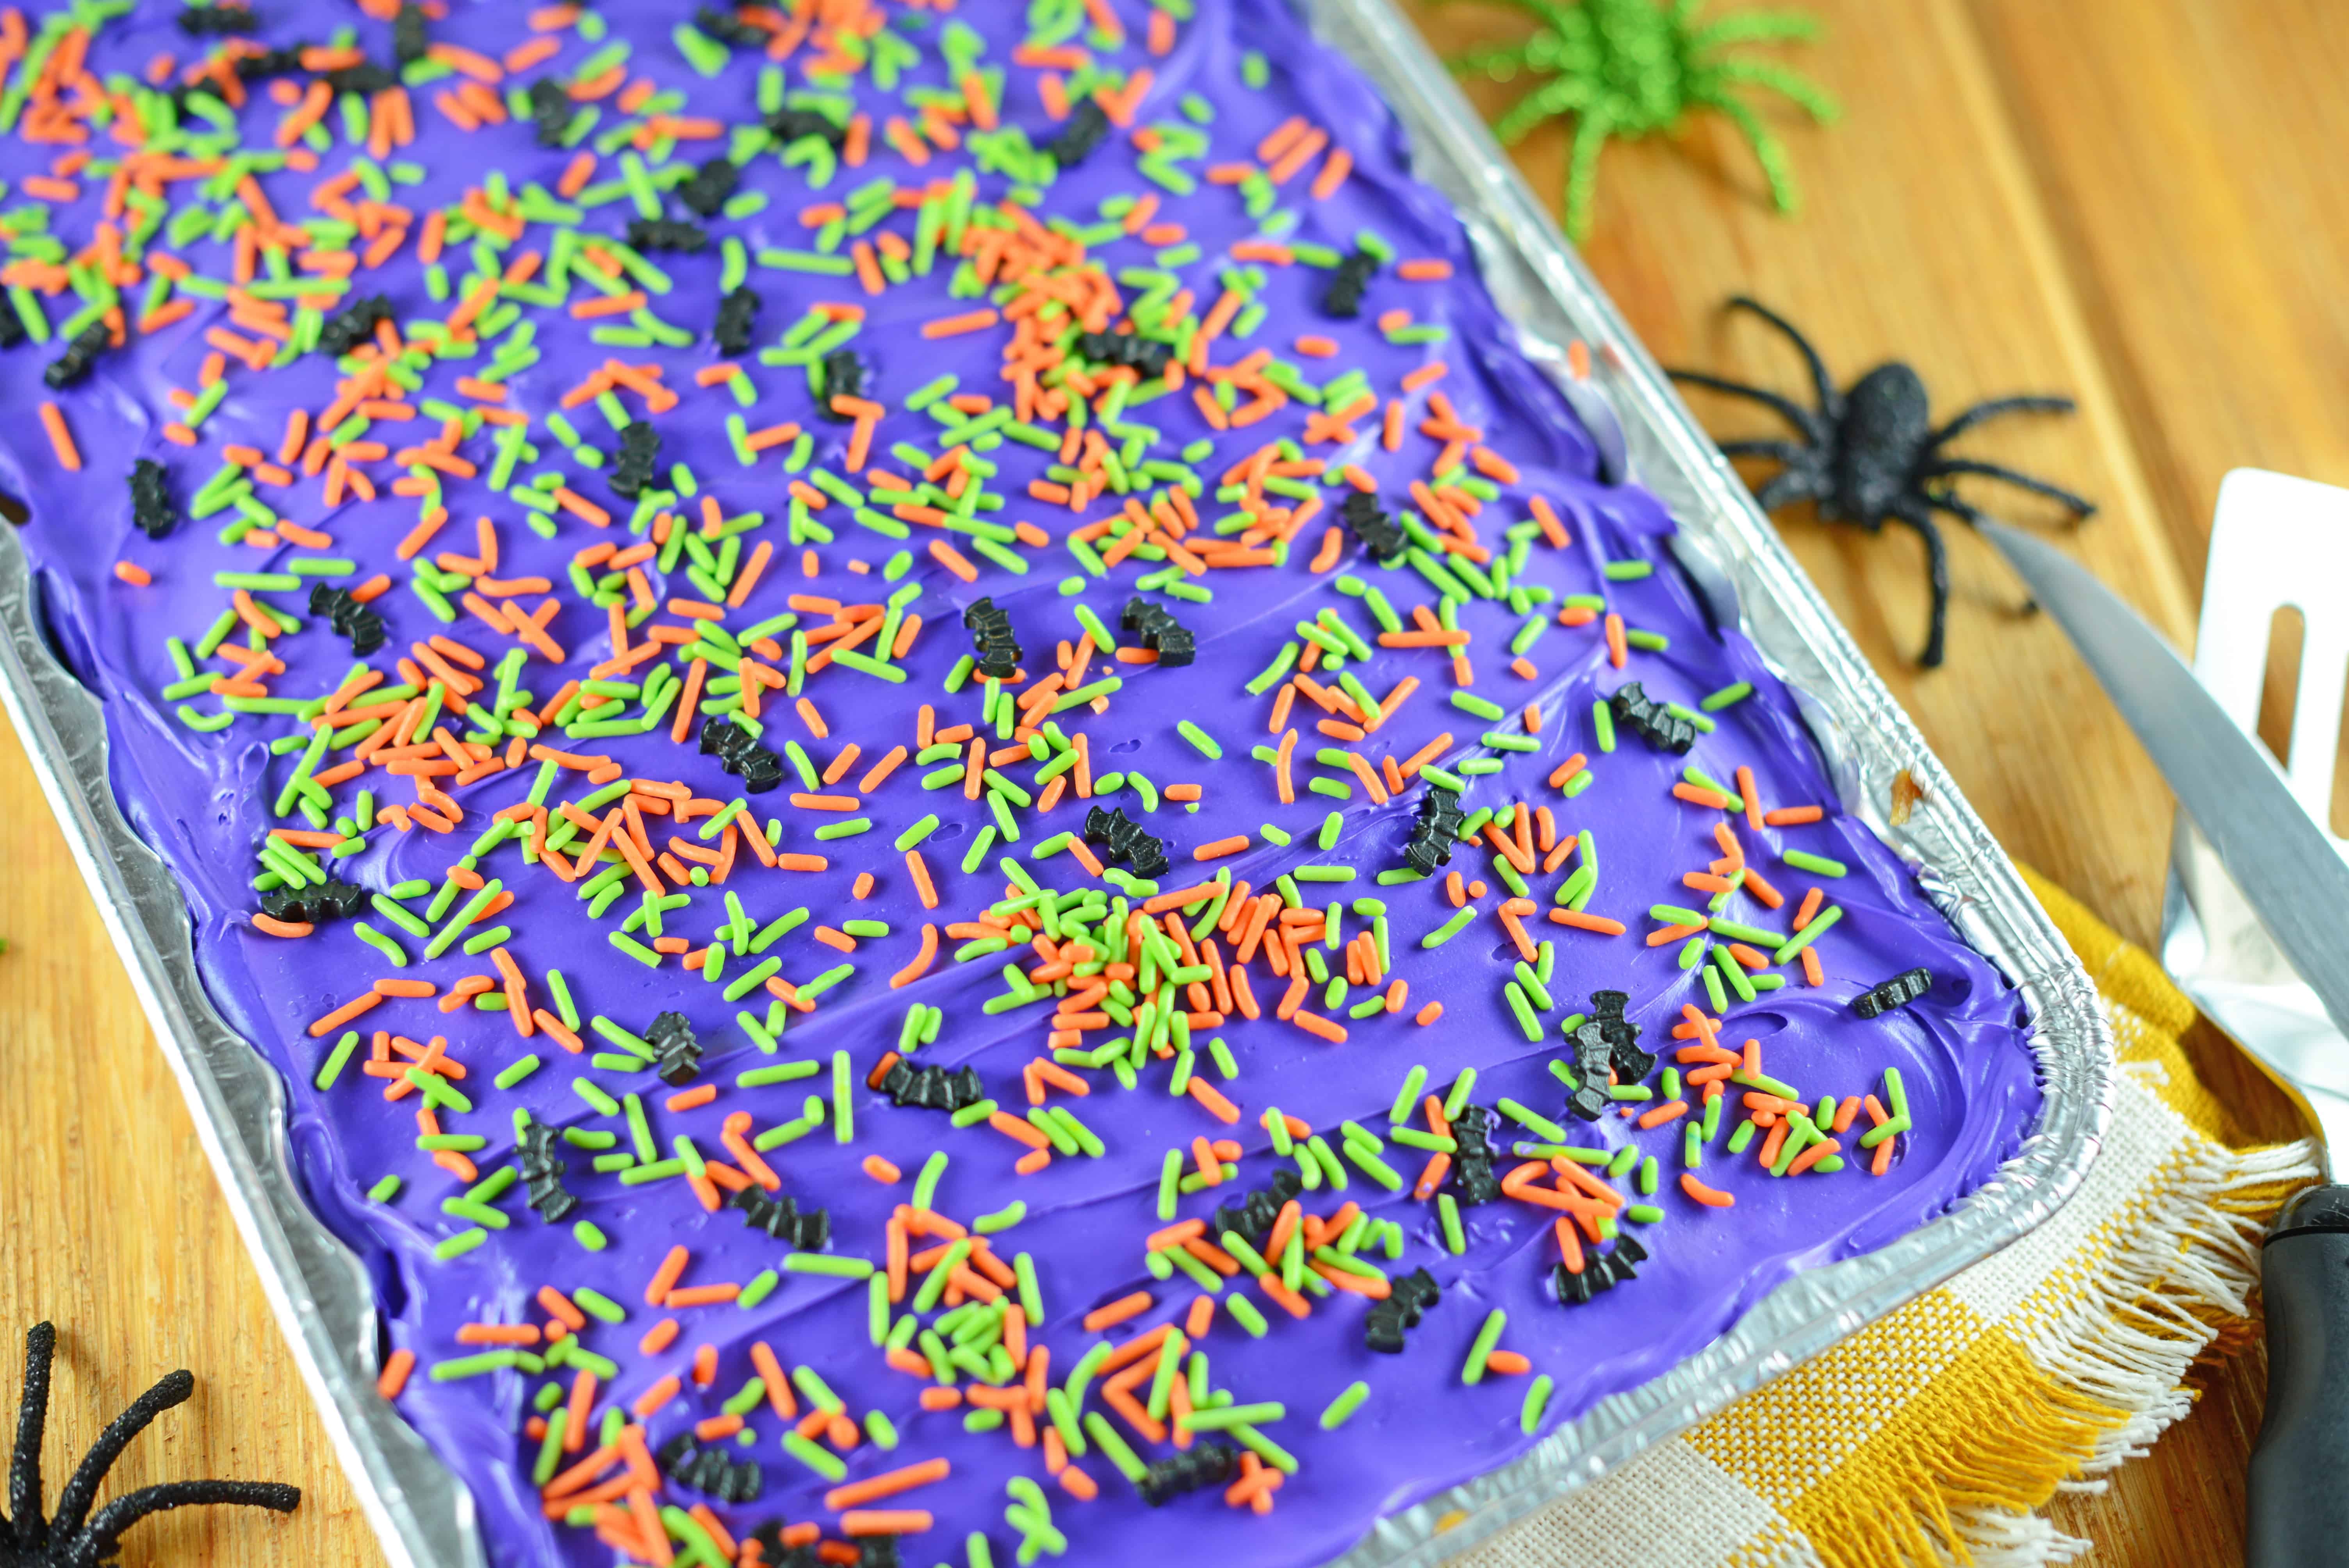 Halloween Sugar Cookie Bars are thick and chewy, frosted with a classic buttercream and topped with festive sprinkles.